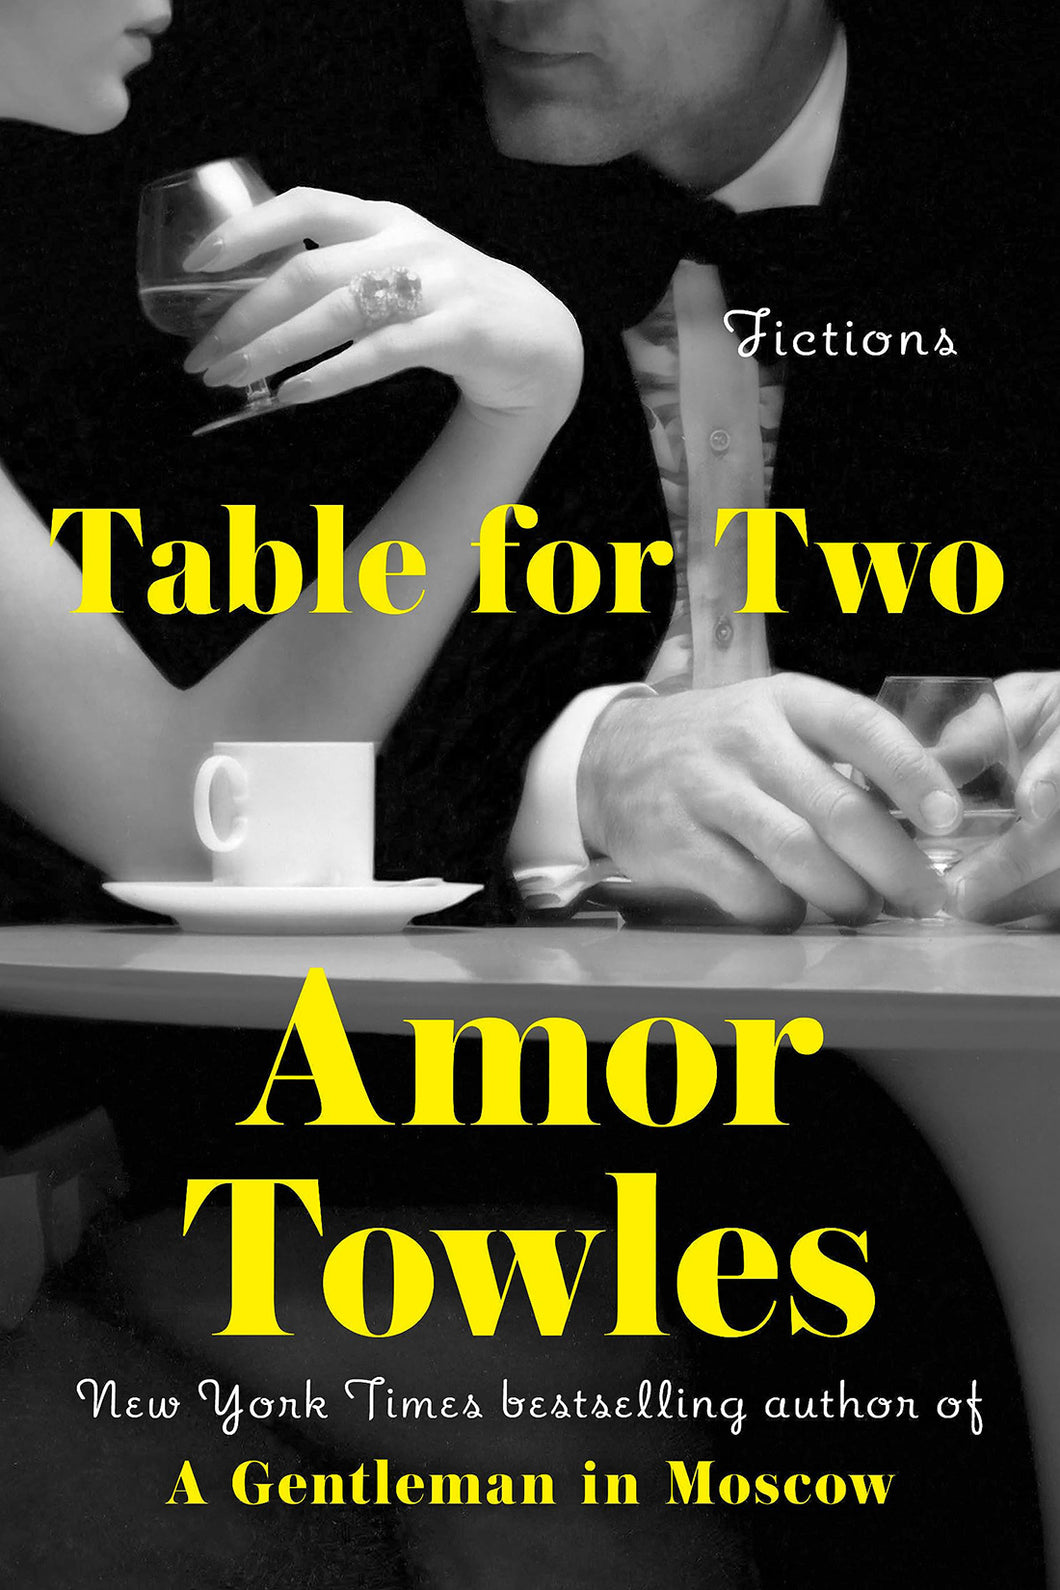 Table for Two: Fictions by Amor Towles / BOOK OR BUNDLE - Starting at $32!